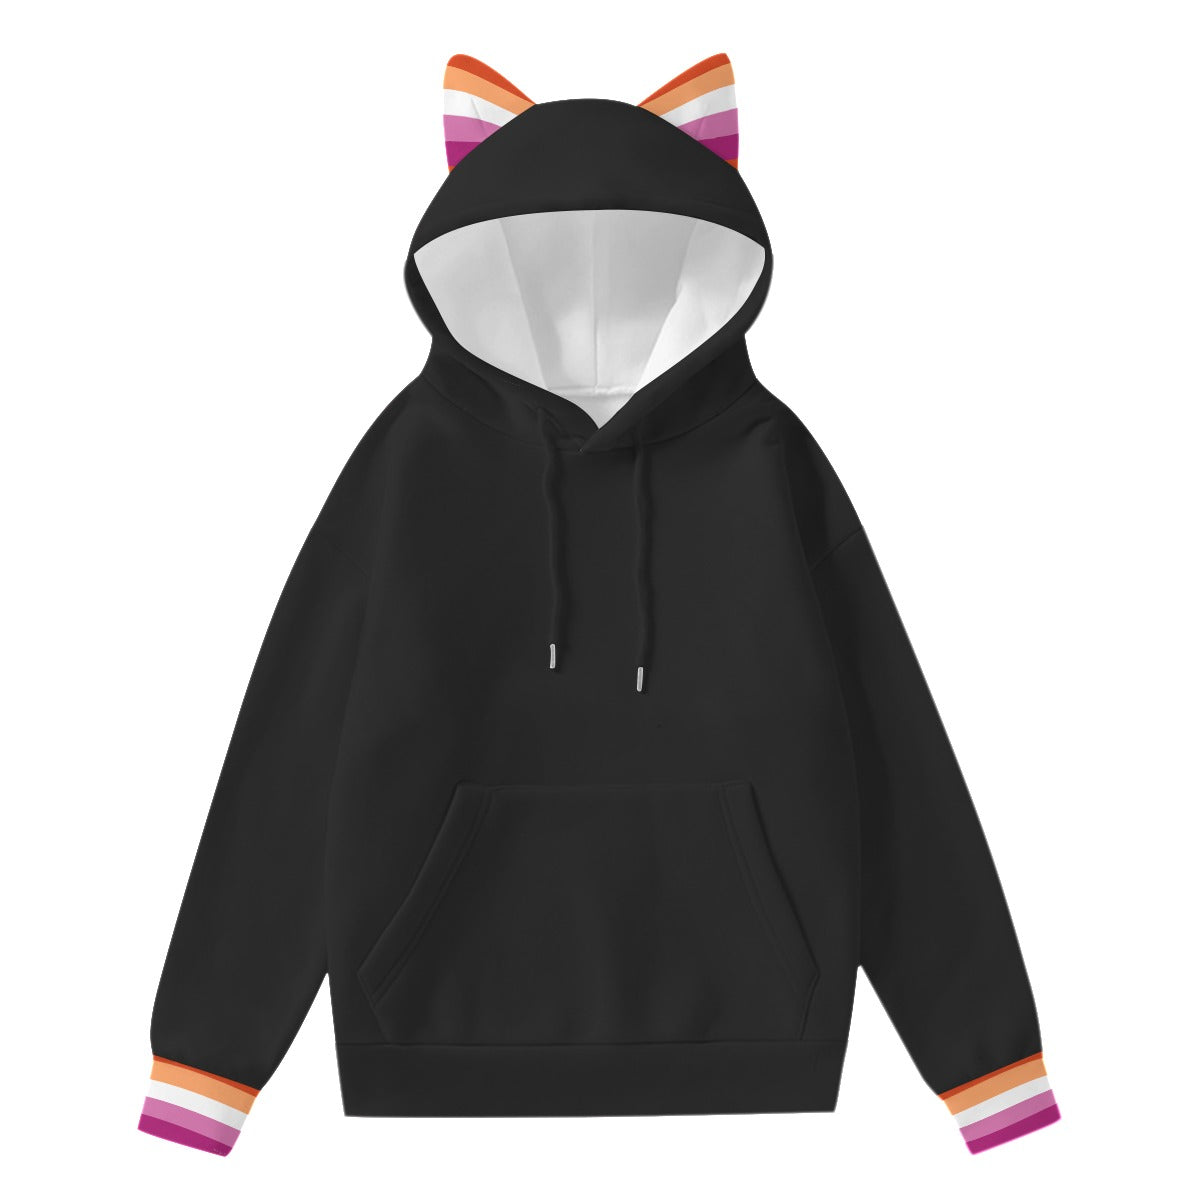 Pride Hoodie with Ears | Solid Colour with Patterned Accent Ears and Cuffs | Choose Your Colour and Pride Stripes